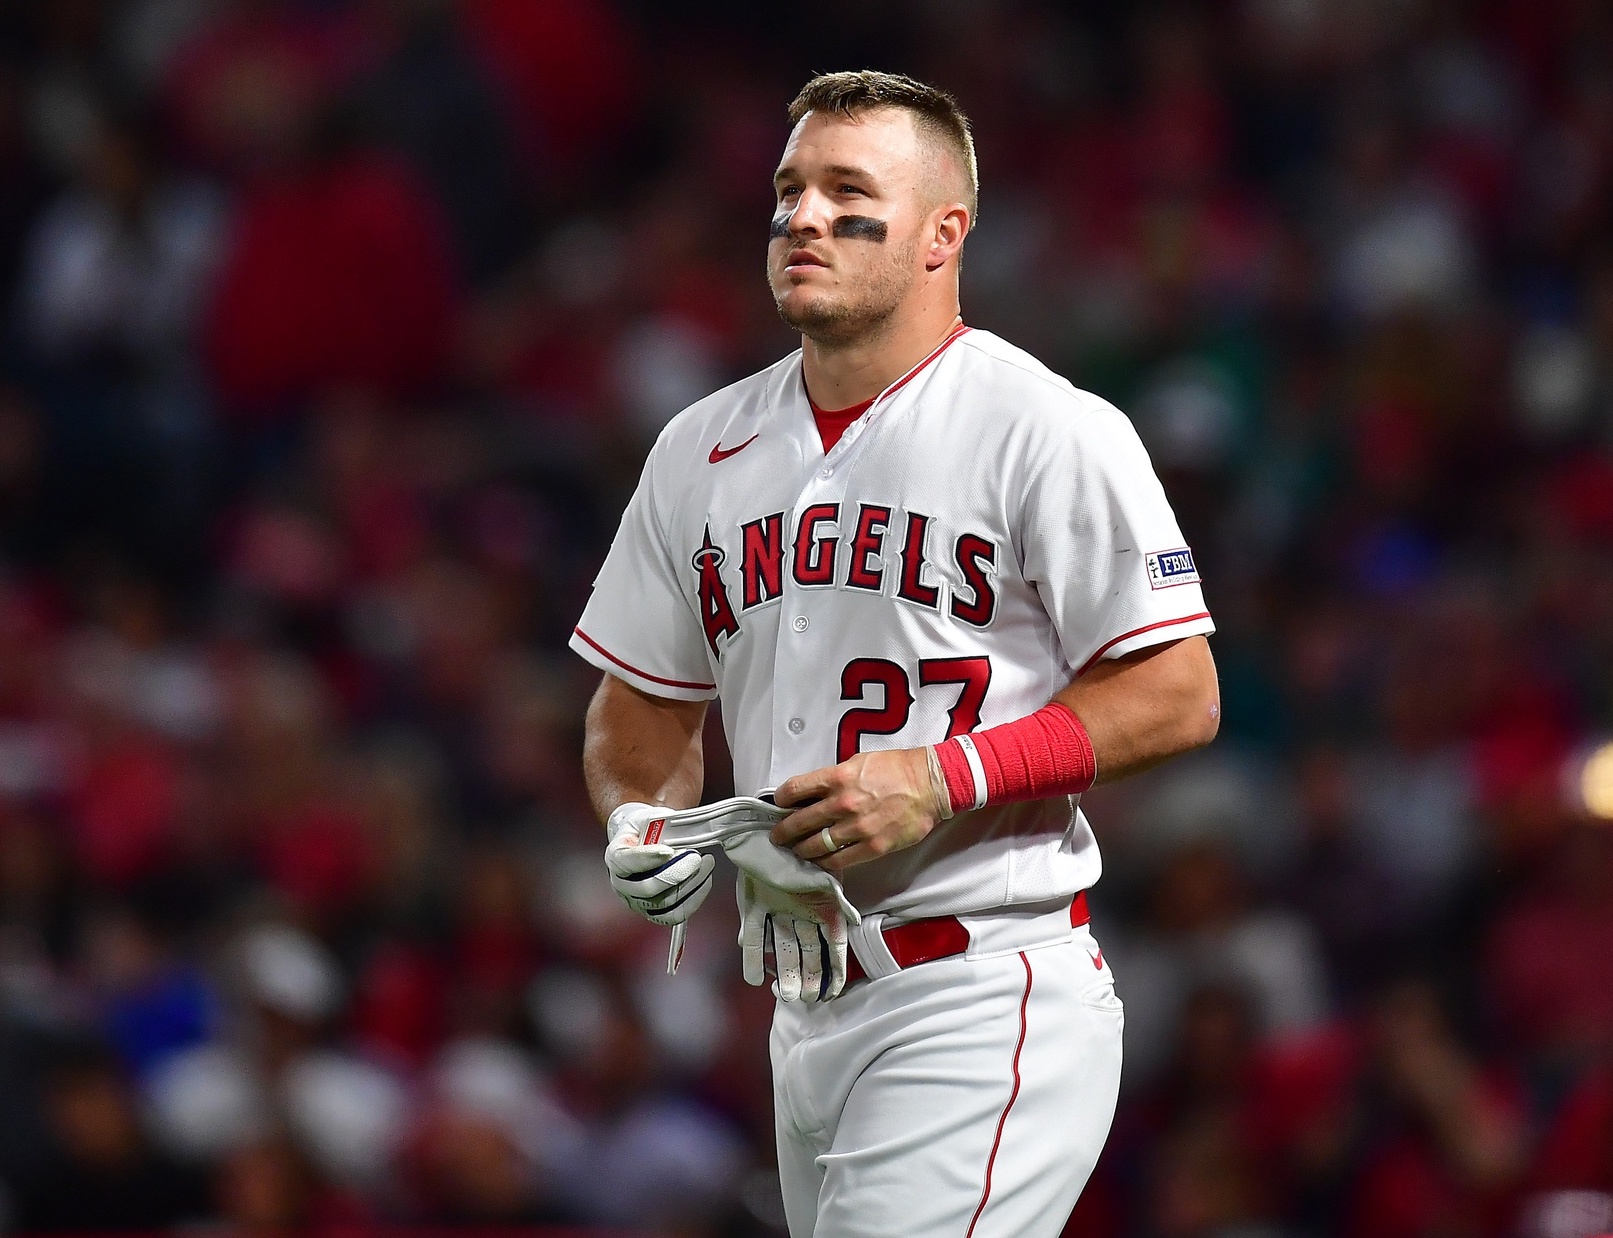 Angels Injury Update: Mike Trout Out For Season After Move To 60-Day IL -  Angels Nation